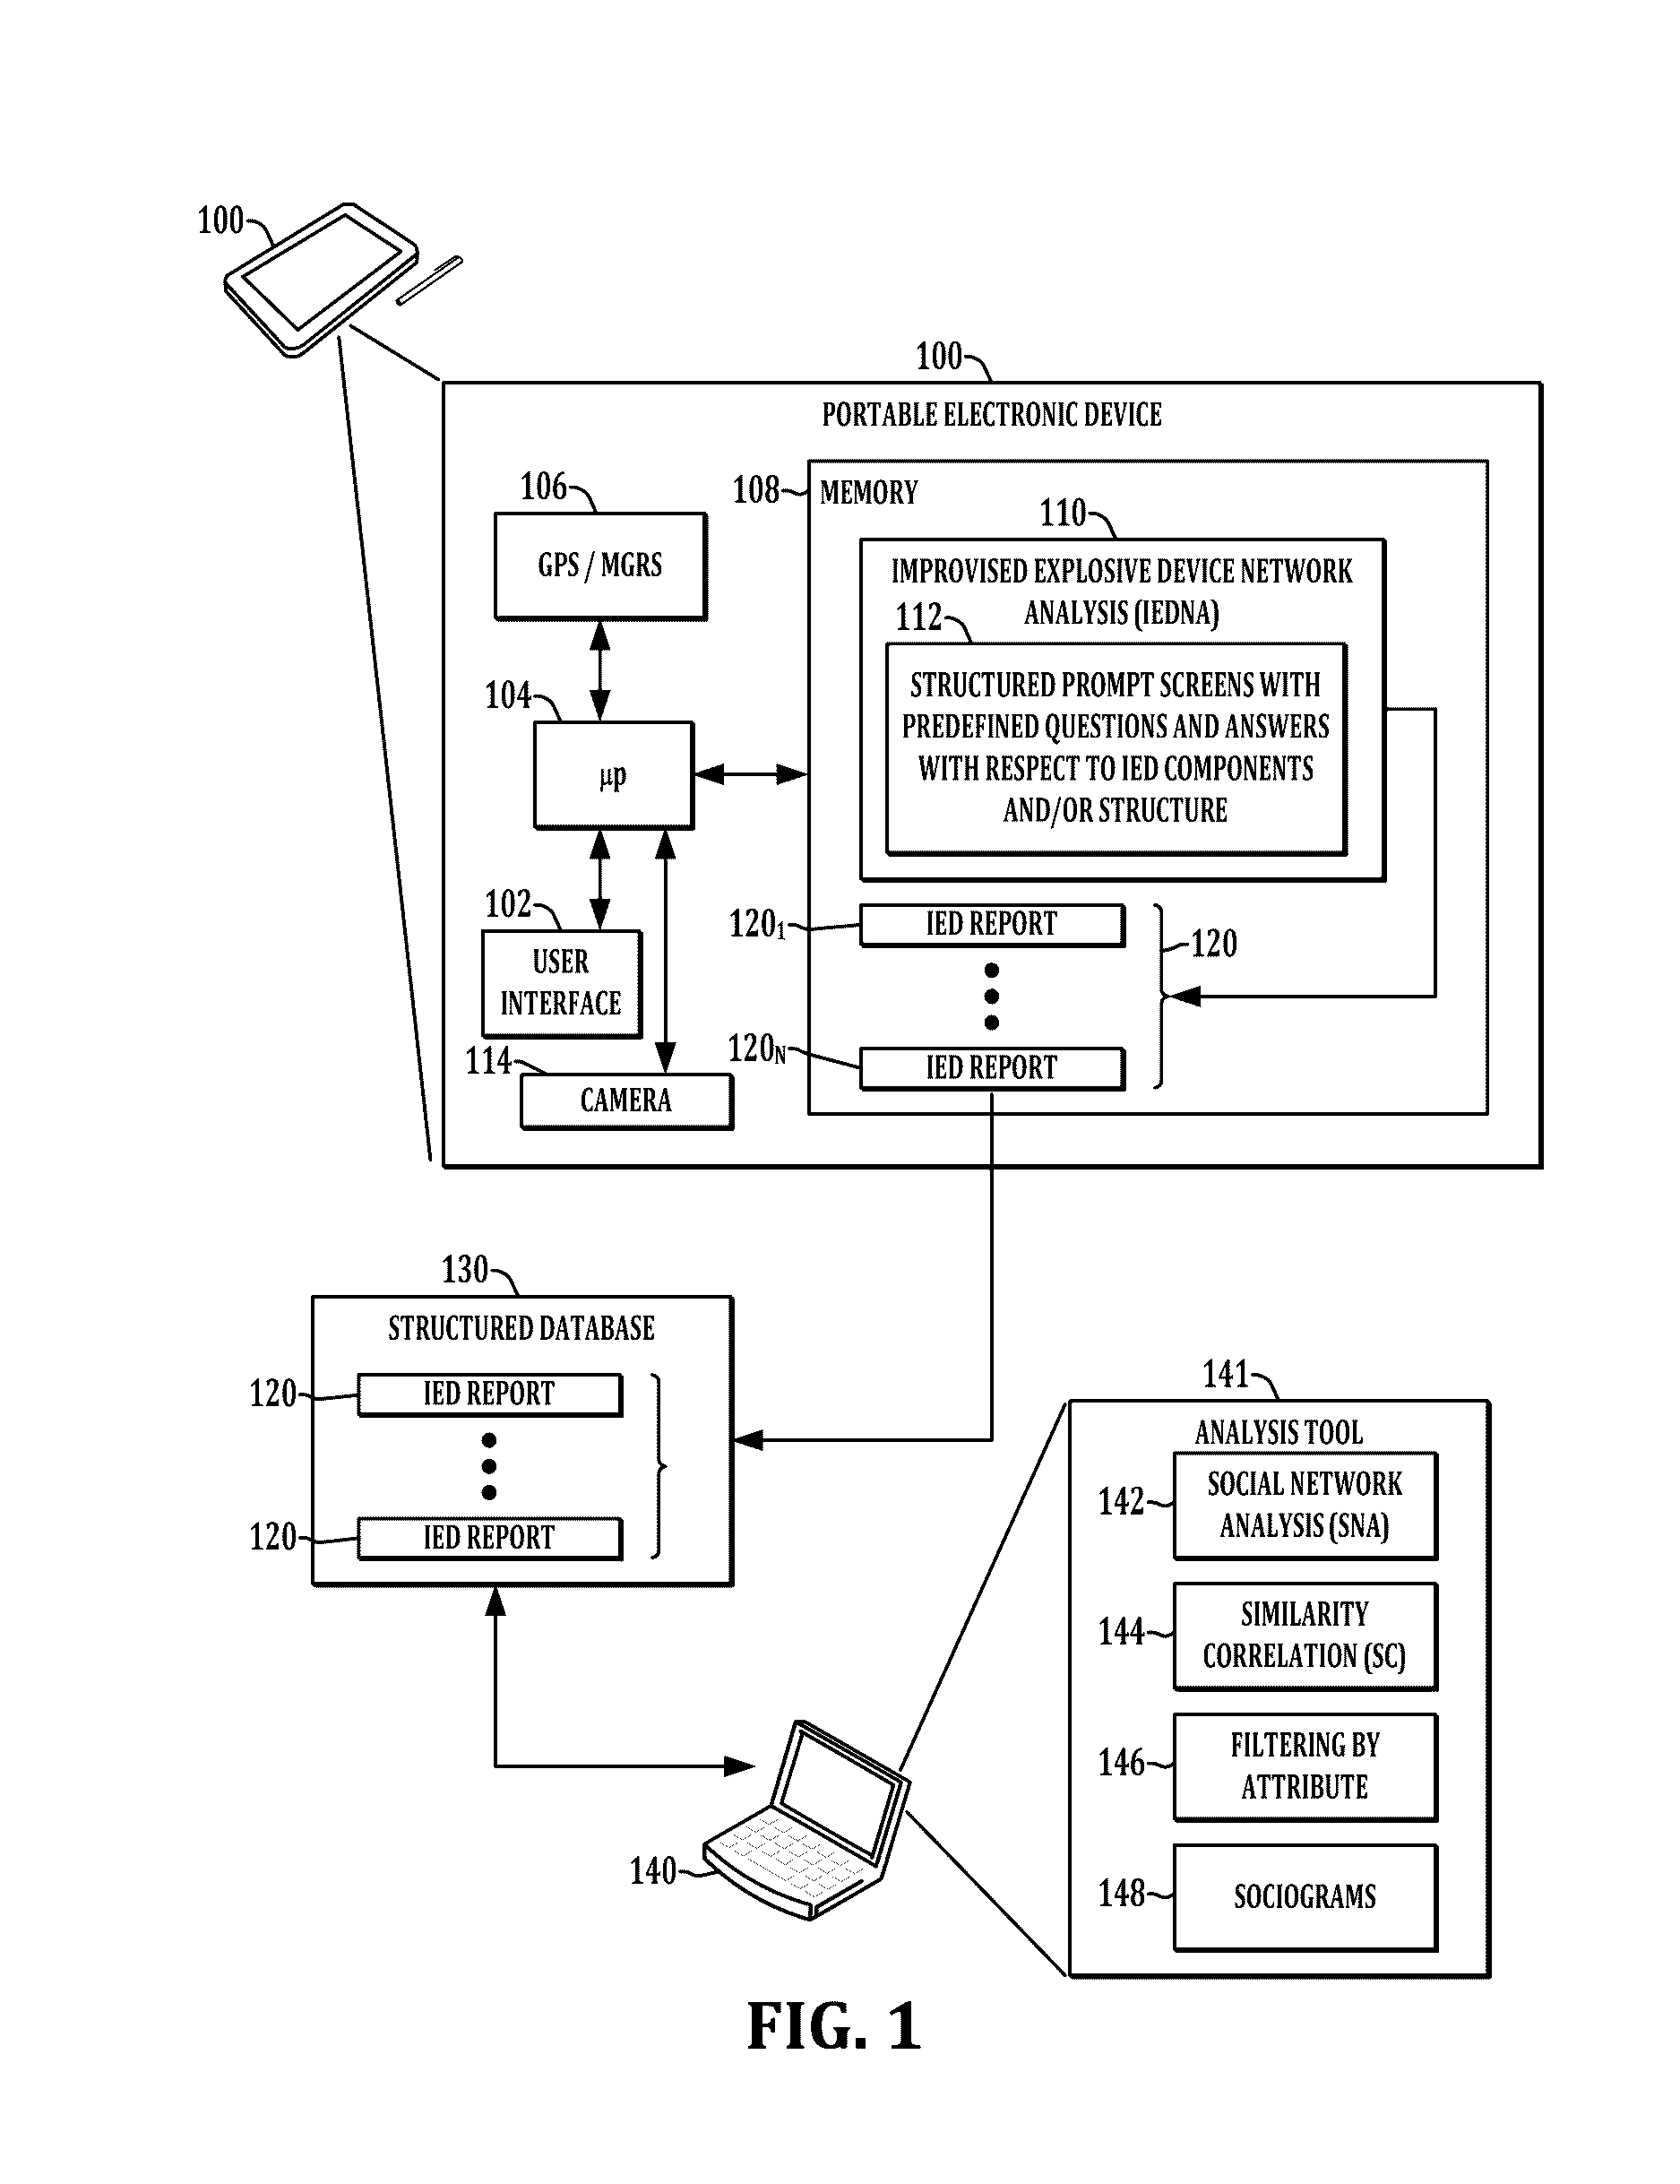 Apparatus and method for improvised explosive device (IED) network analysis